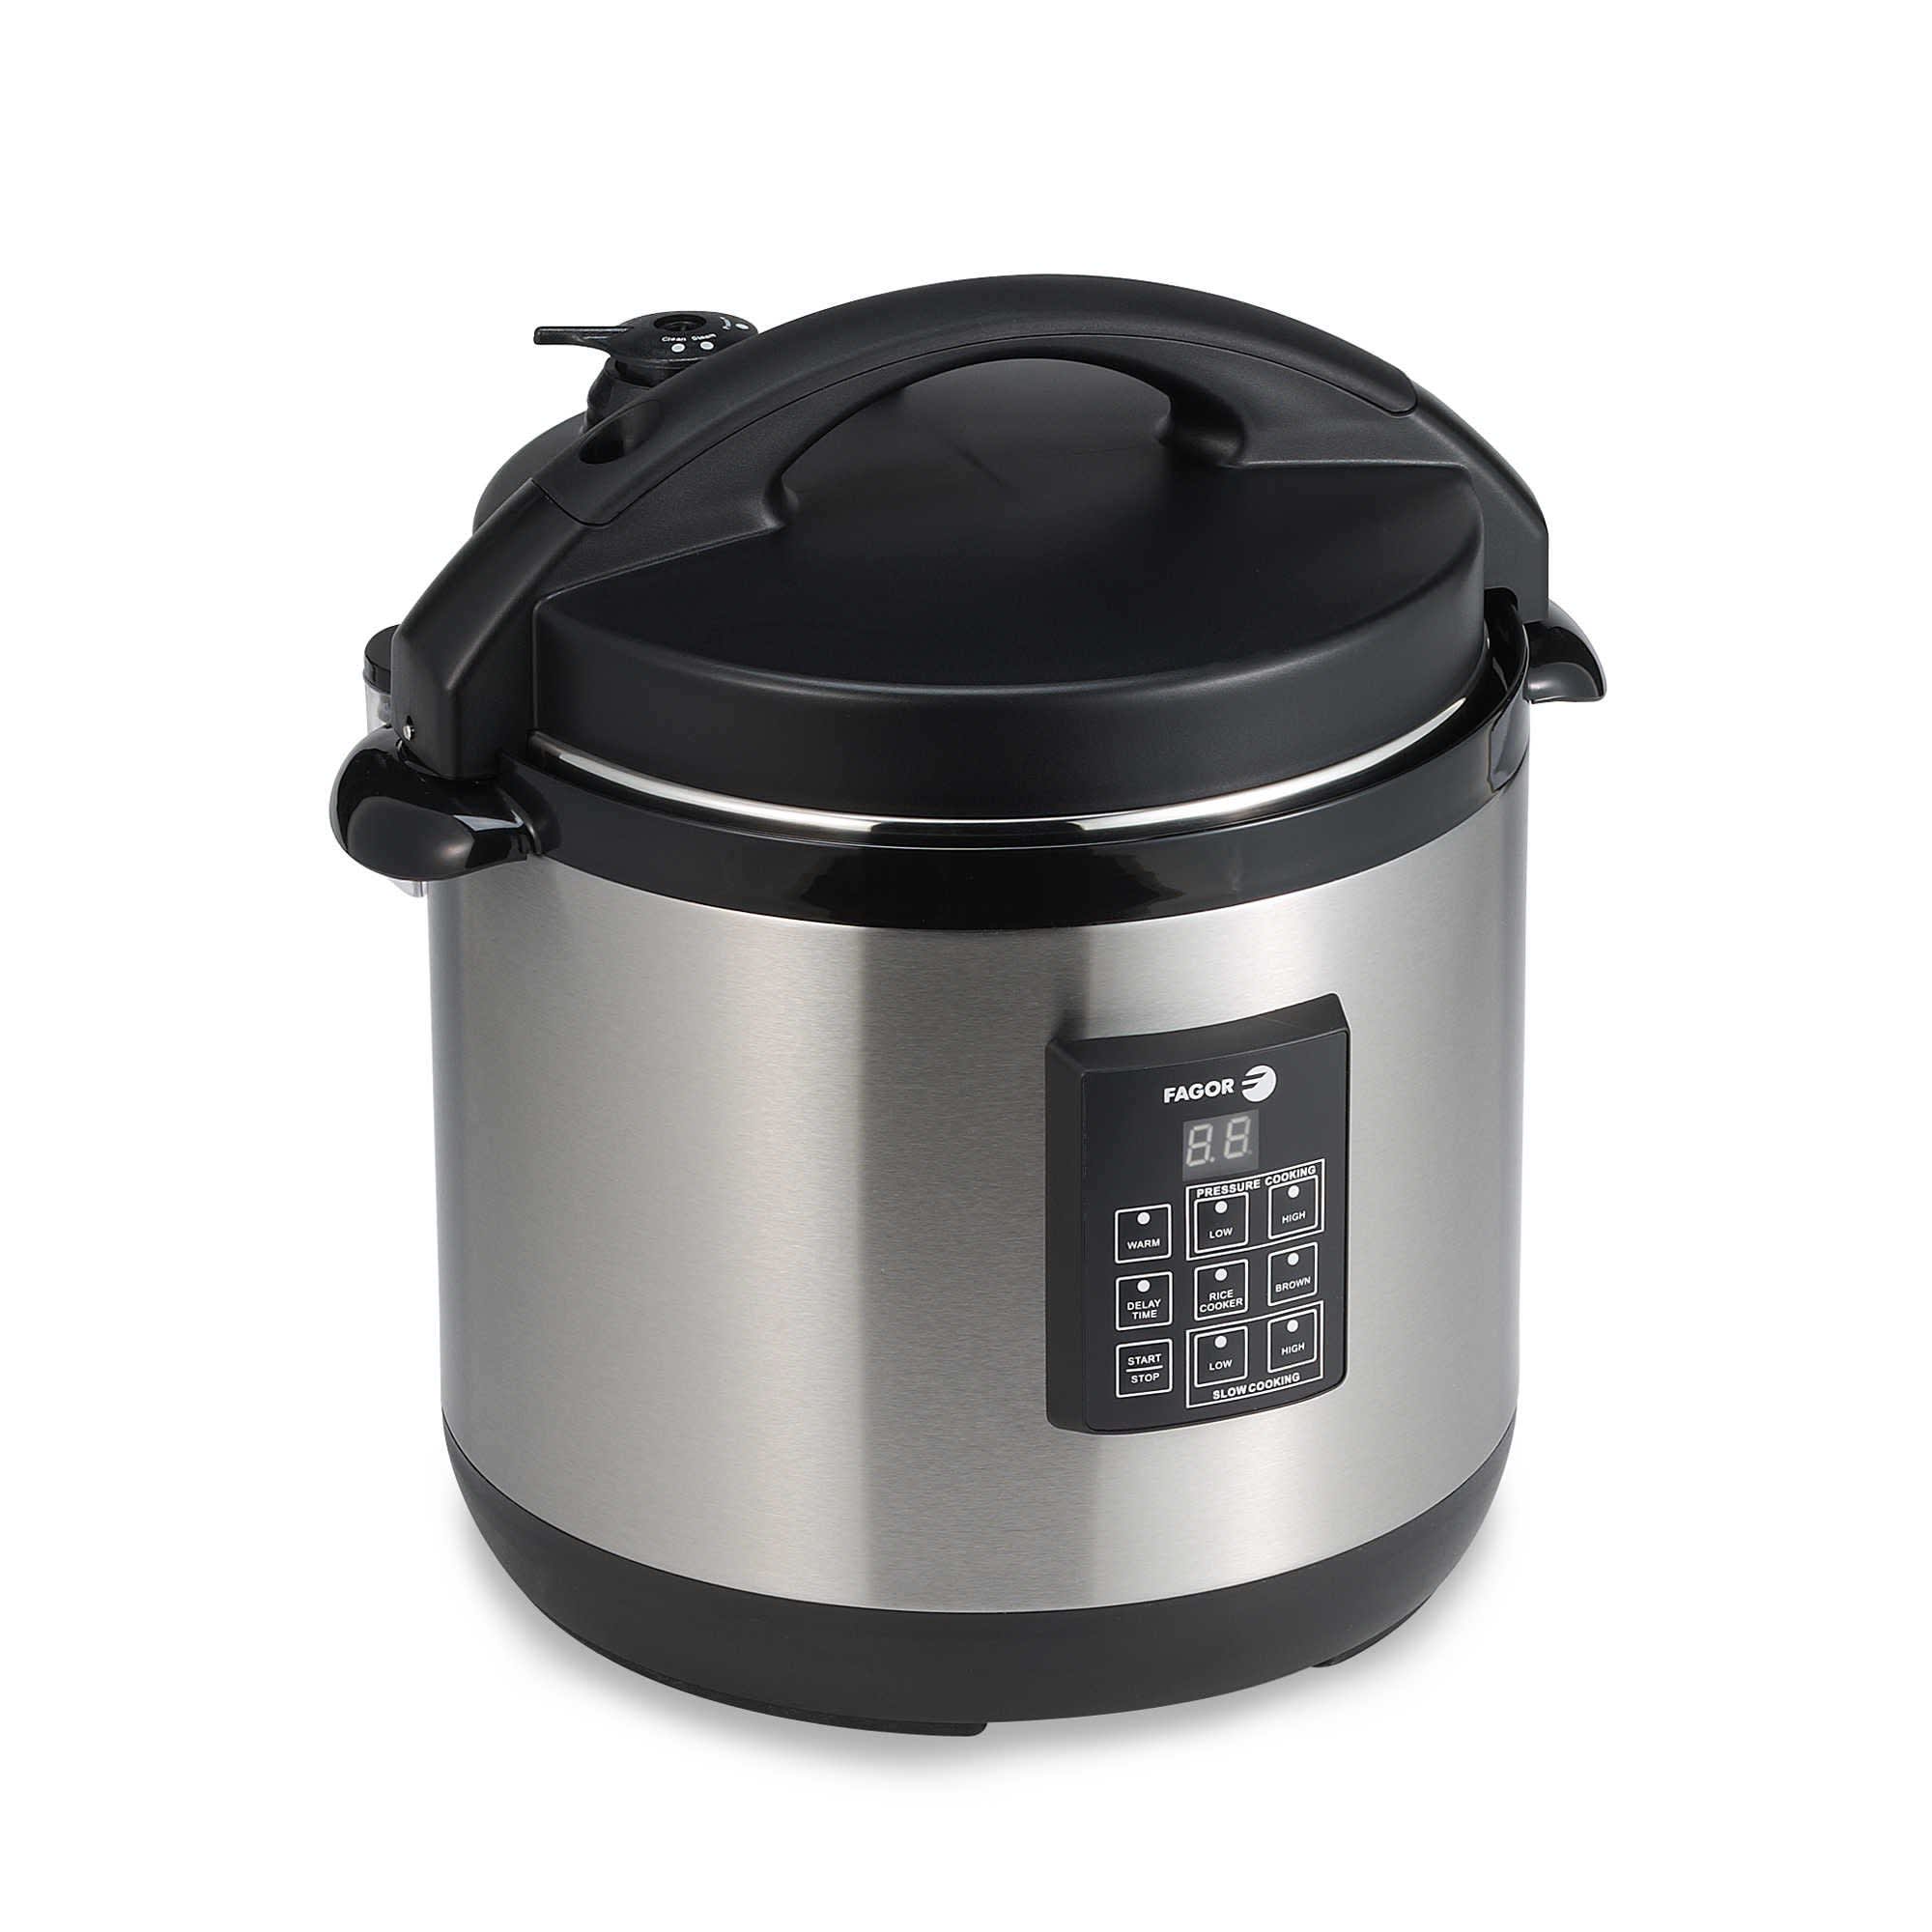 FSHN22-10/FS446: The Misconceptions about Electric Pressure Cookers